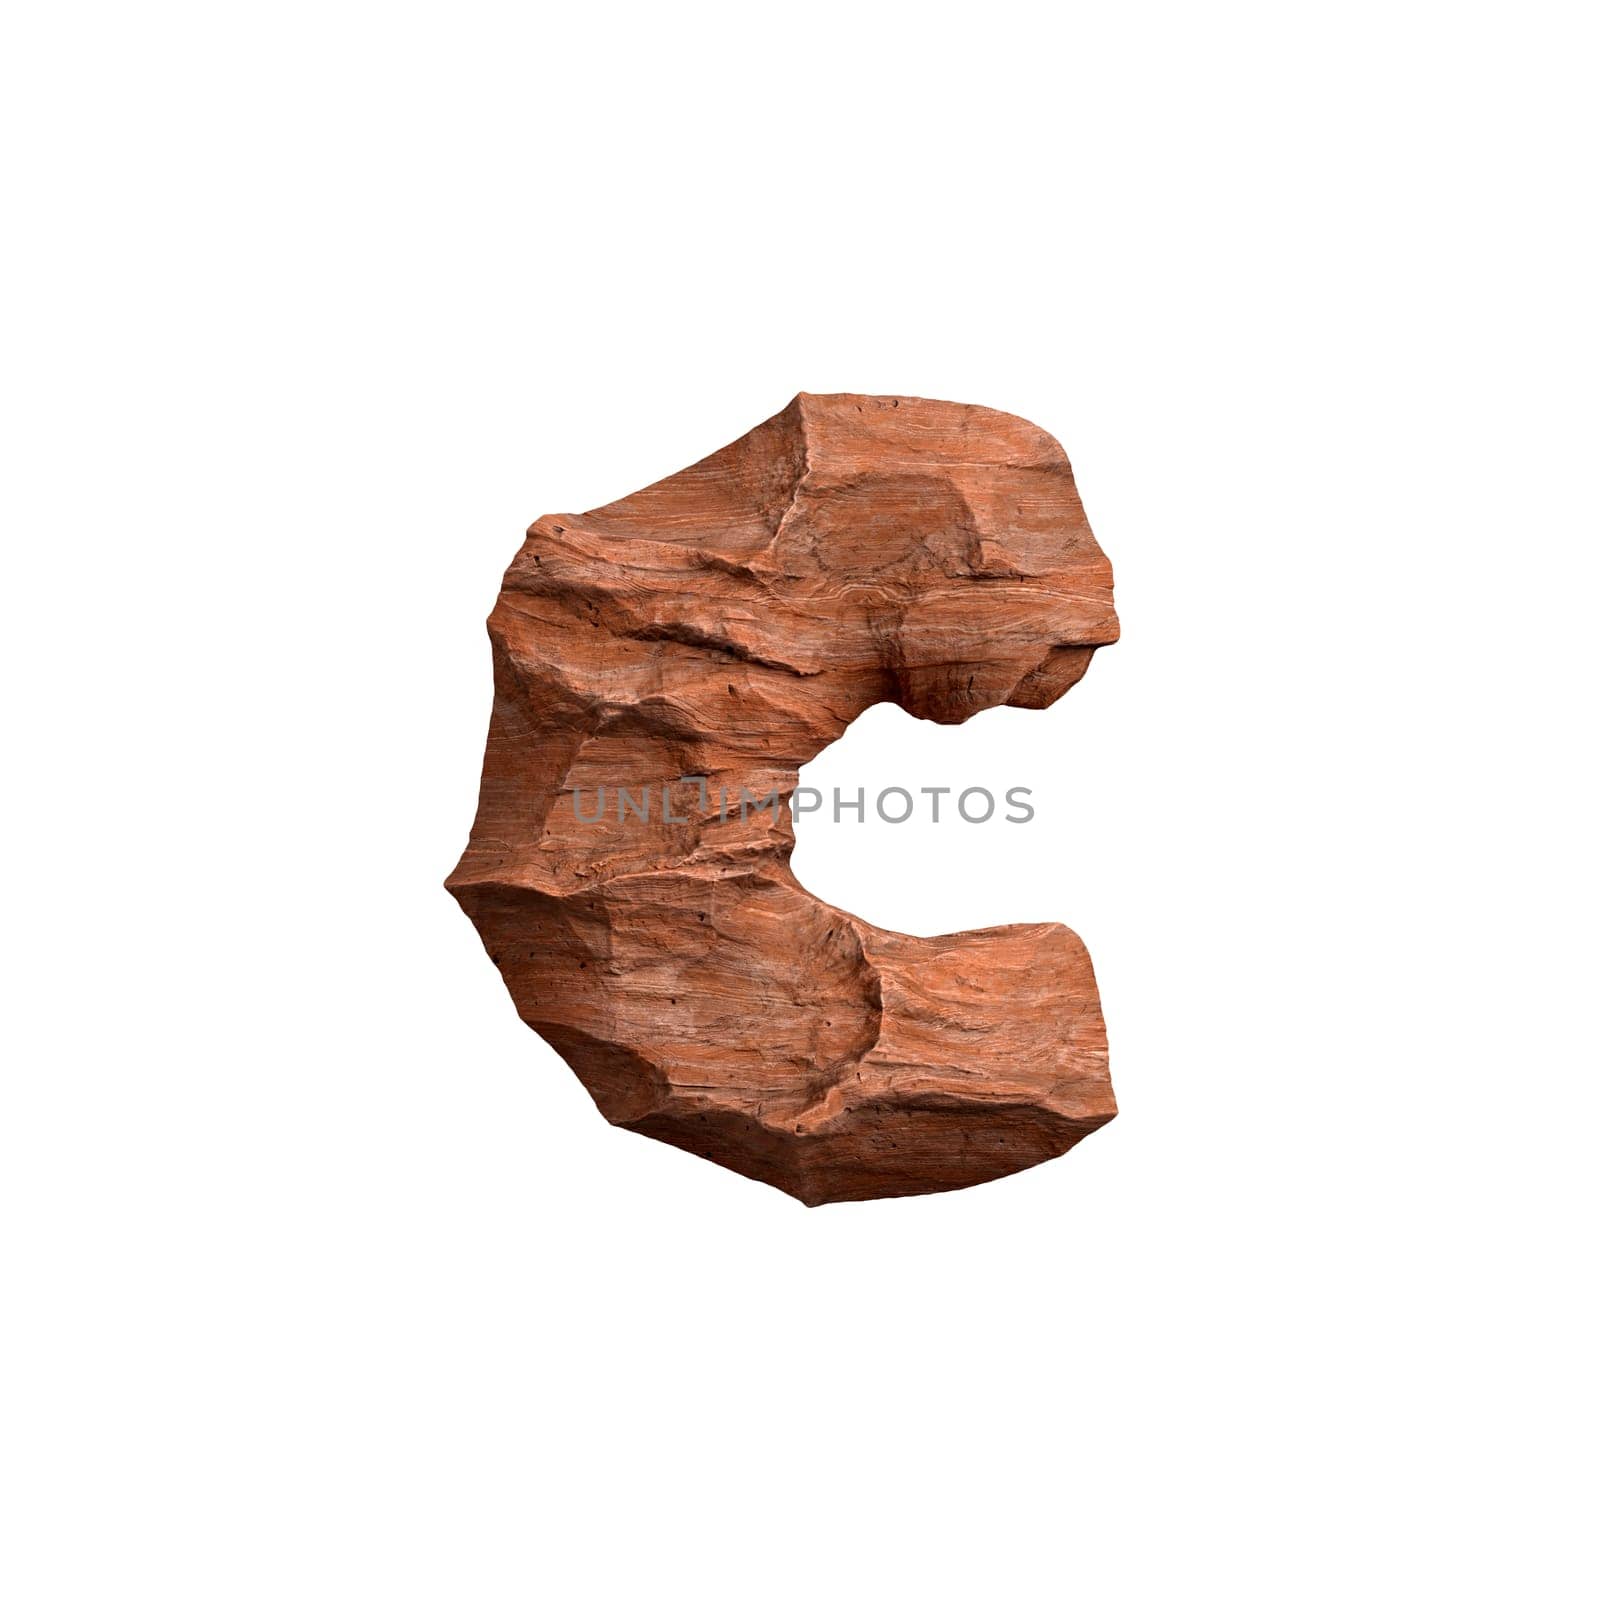 Desert sandstone letter C - Small 3d red rock font isolated on white background. This alphabet is perfect for creative illustrations related but not limited to Arizona, geology, desert...